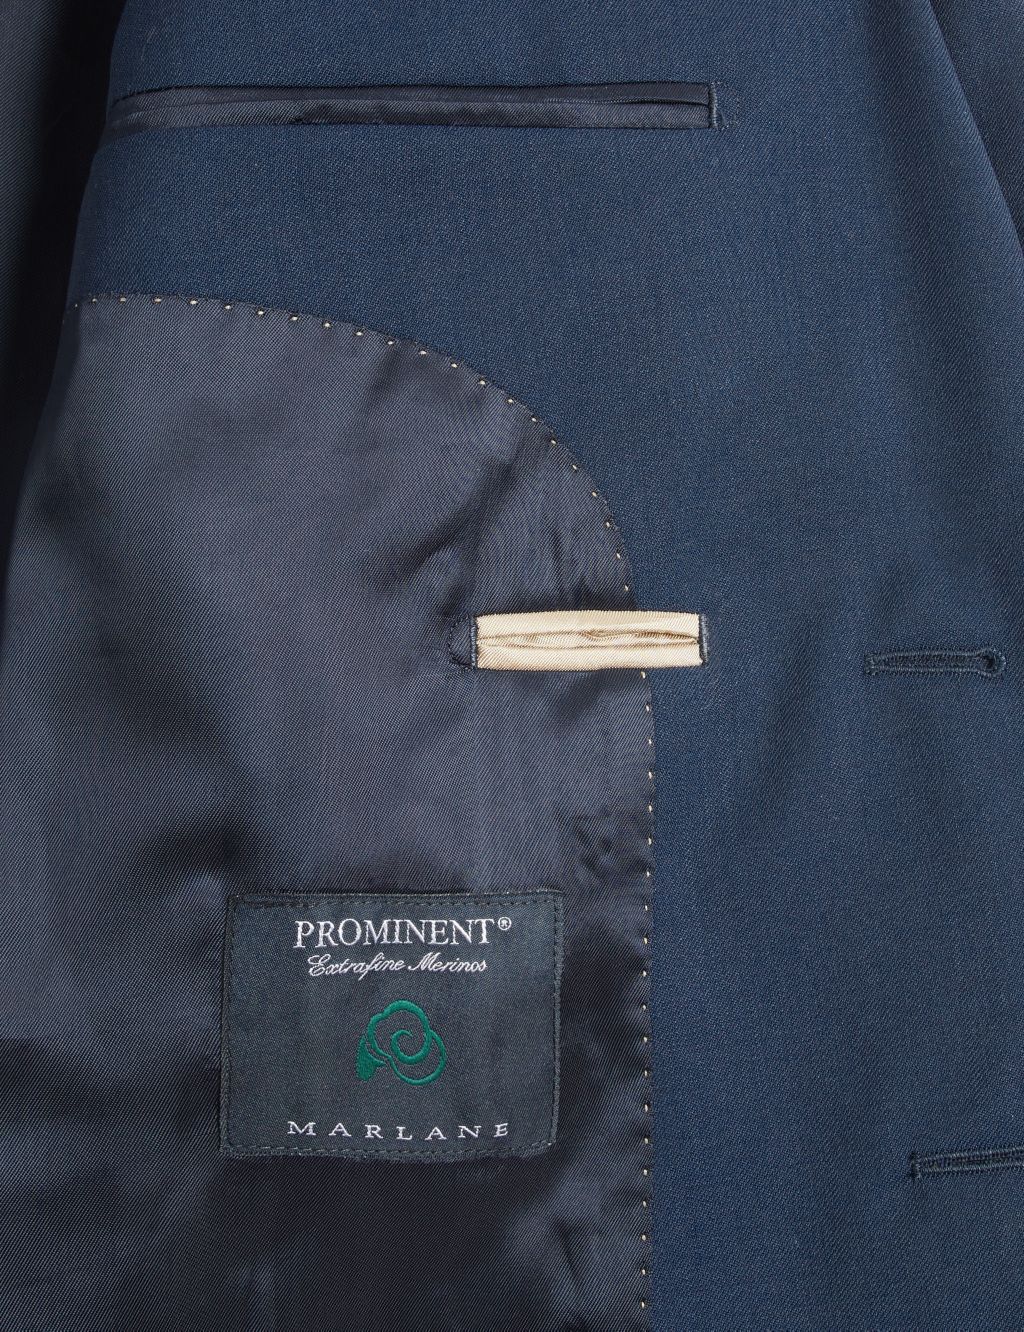 Tailored Fit Pure Wool Twill Jacket image 9